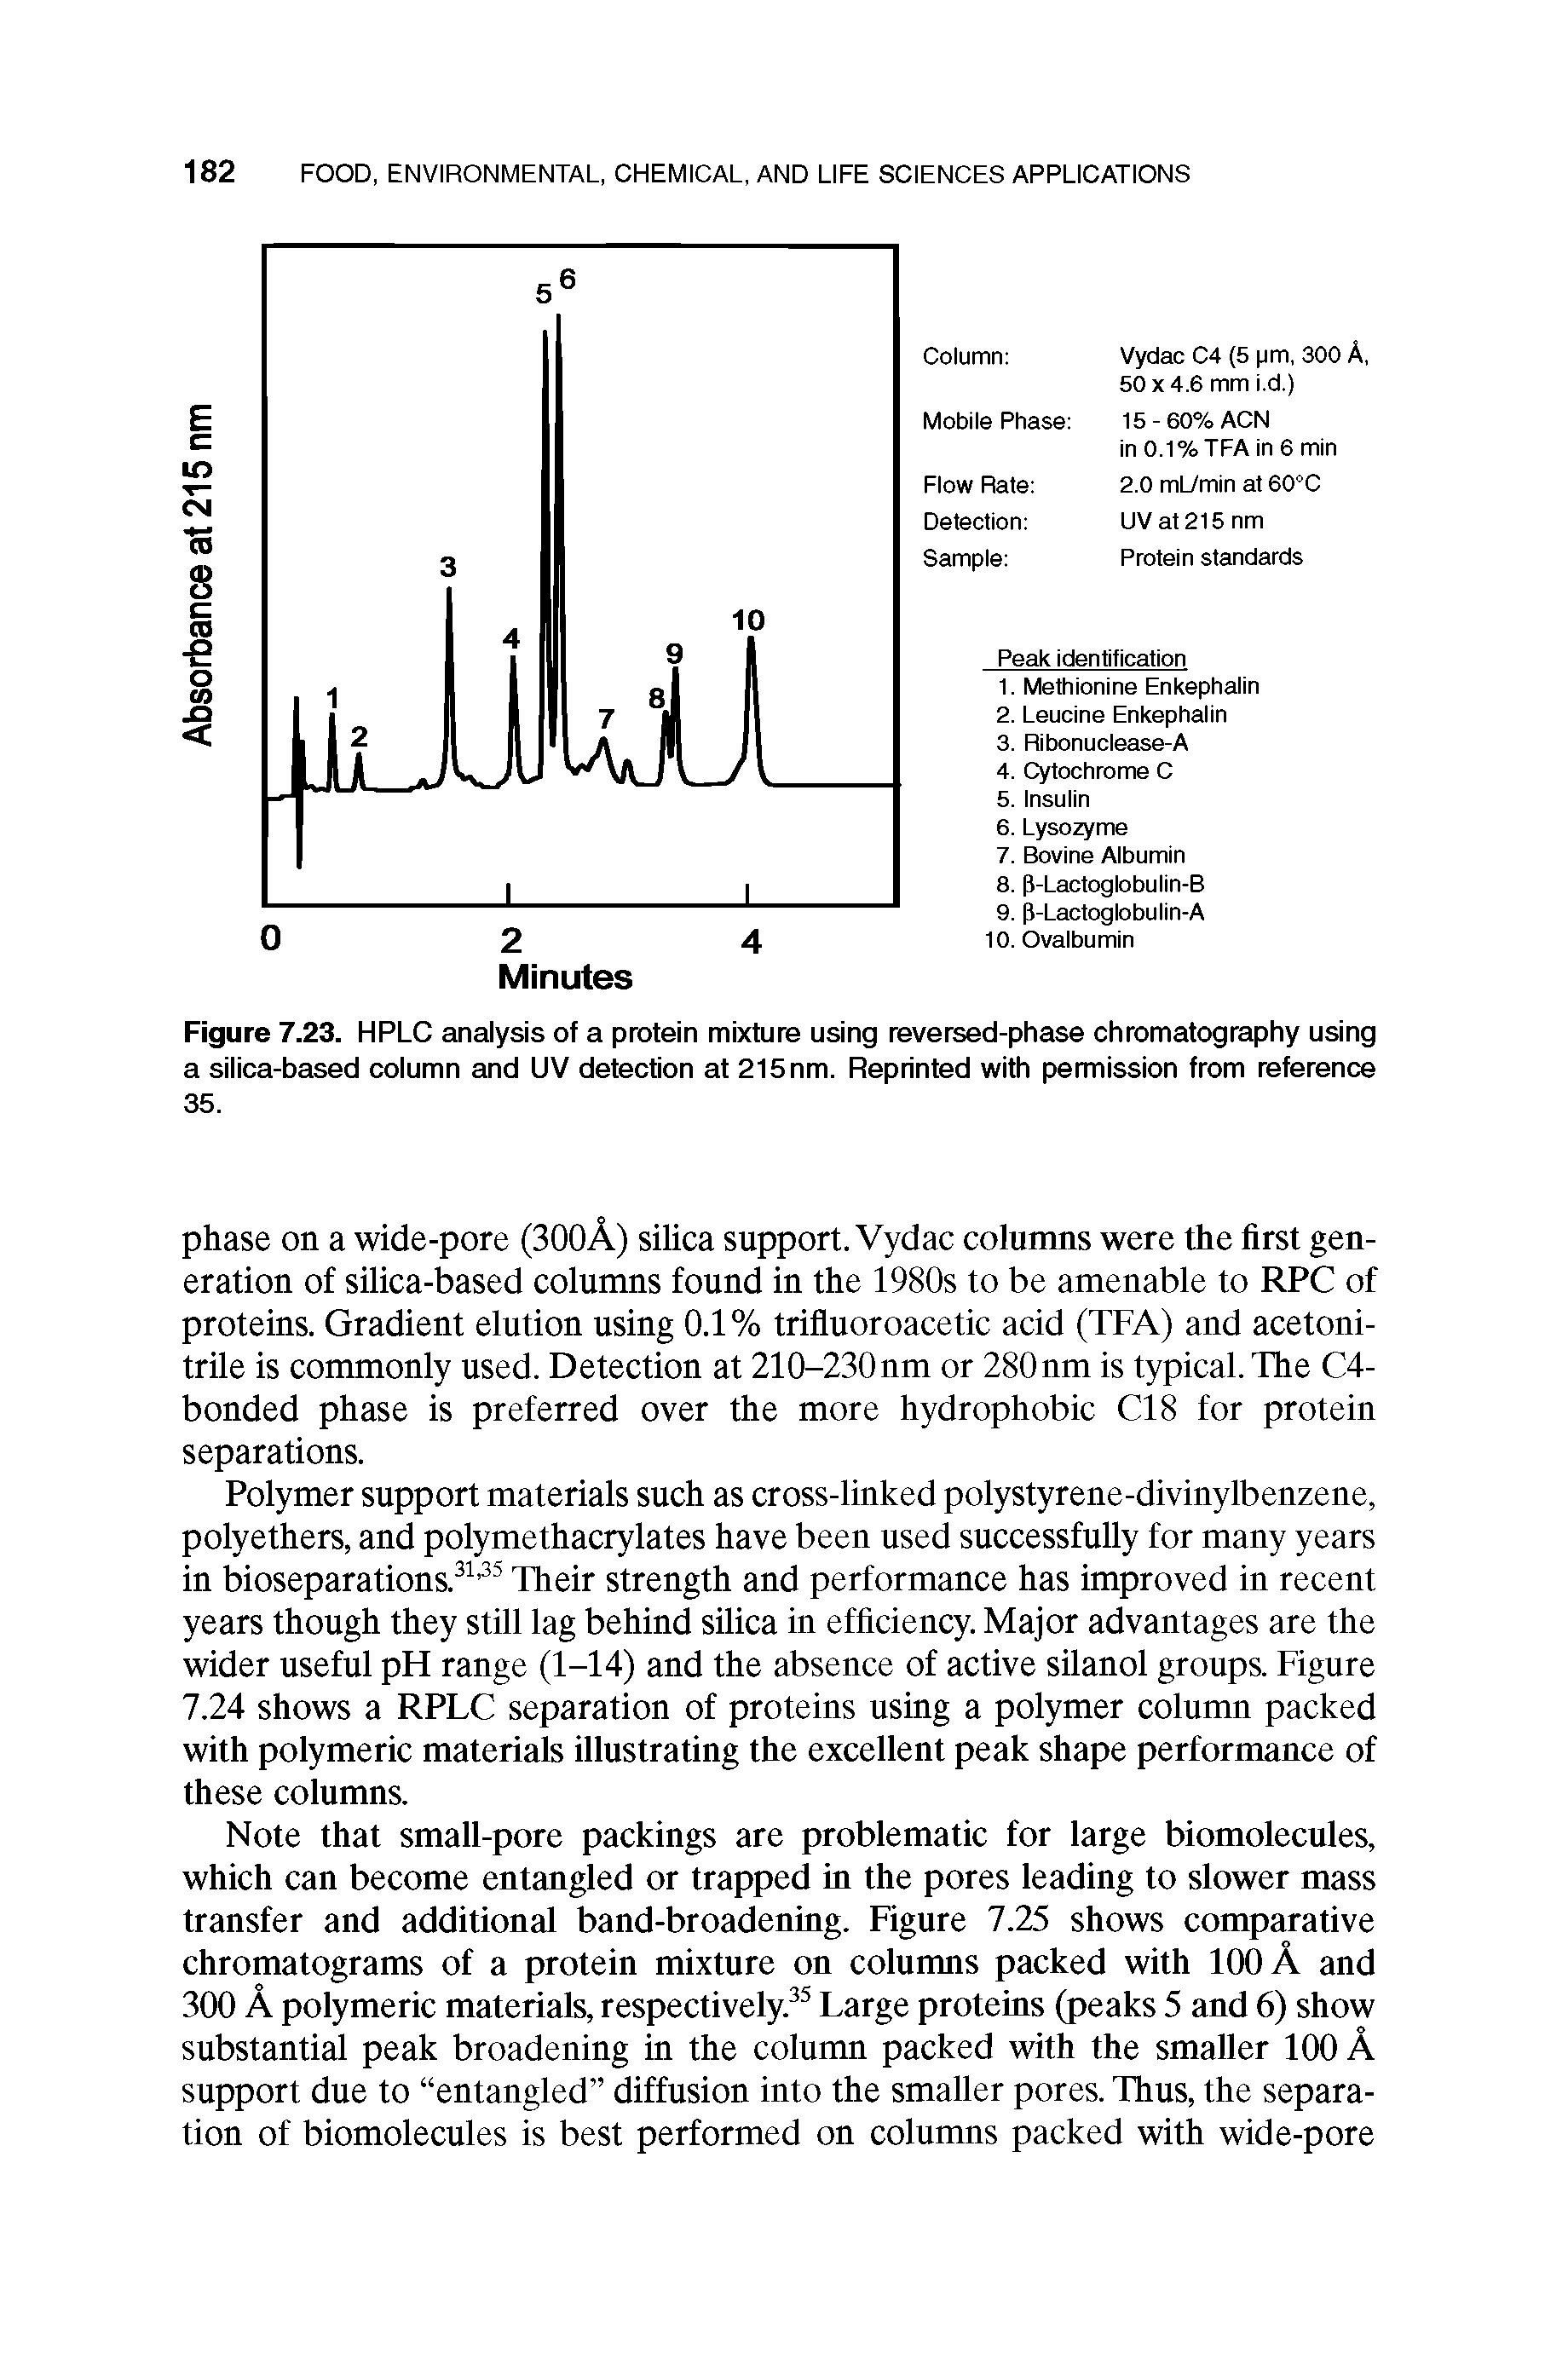 Figure 7.23. HPLC analysis of a protein mixture using reversed-phase chromatography using a silica-based column and UV detection at 215nm. Reprinted with permission from reference 35.